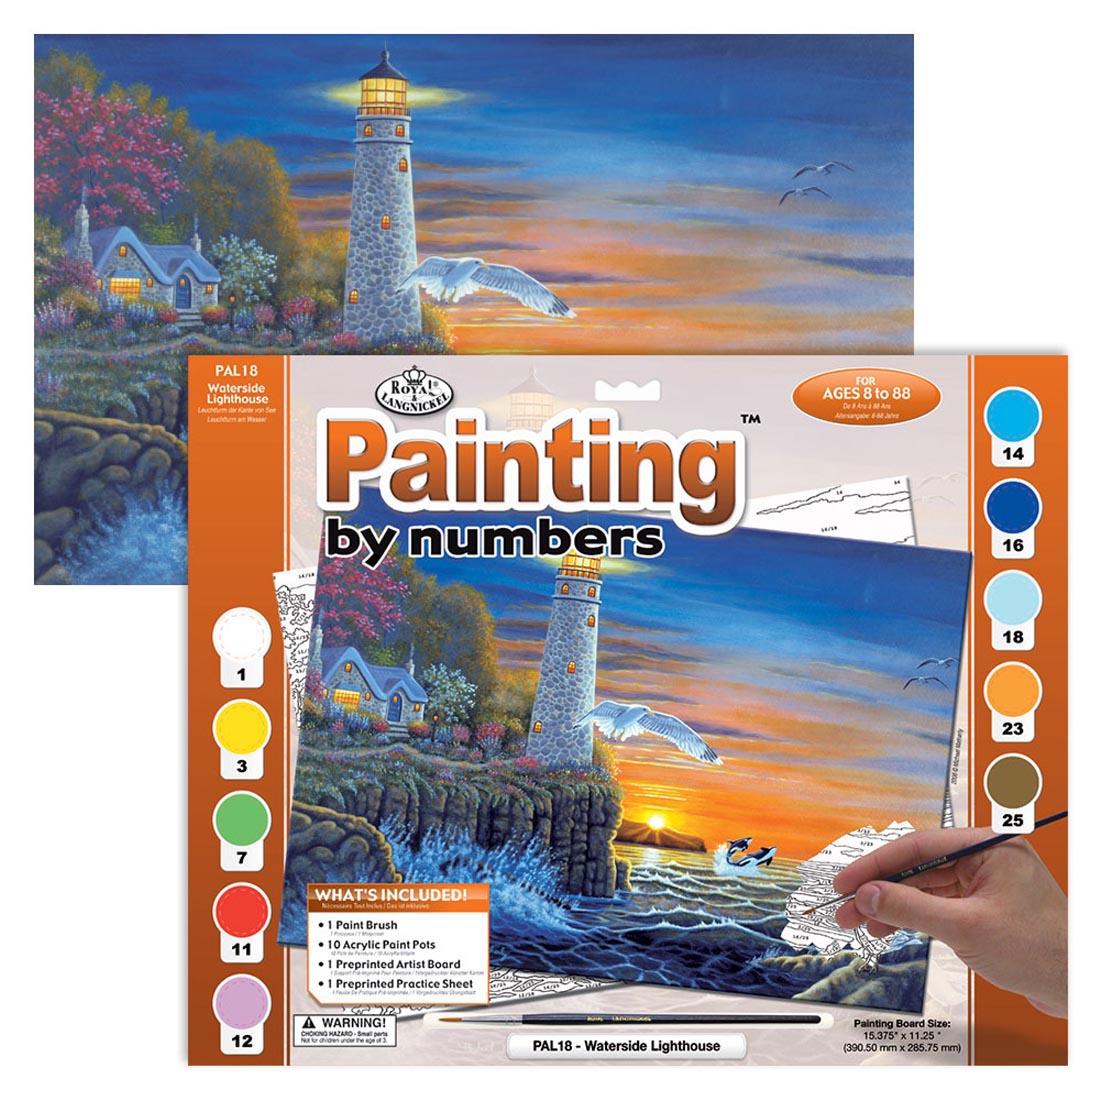 Royal & Langnickel Painting By Numbers Adult Large: Waterside Lighthouse package with the completed painting behind it